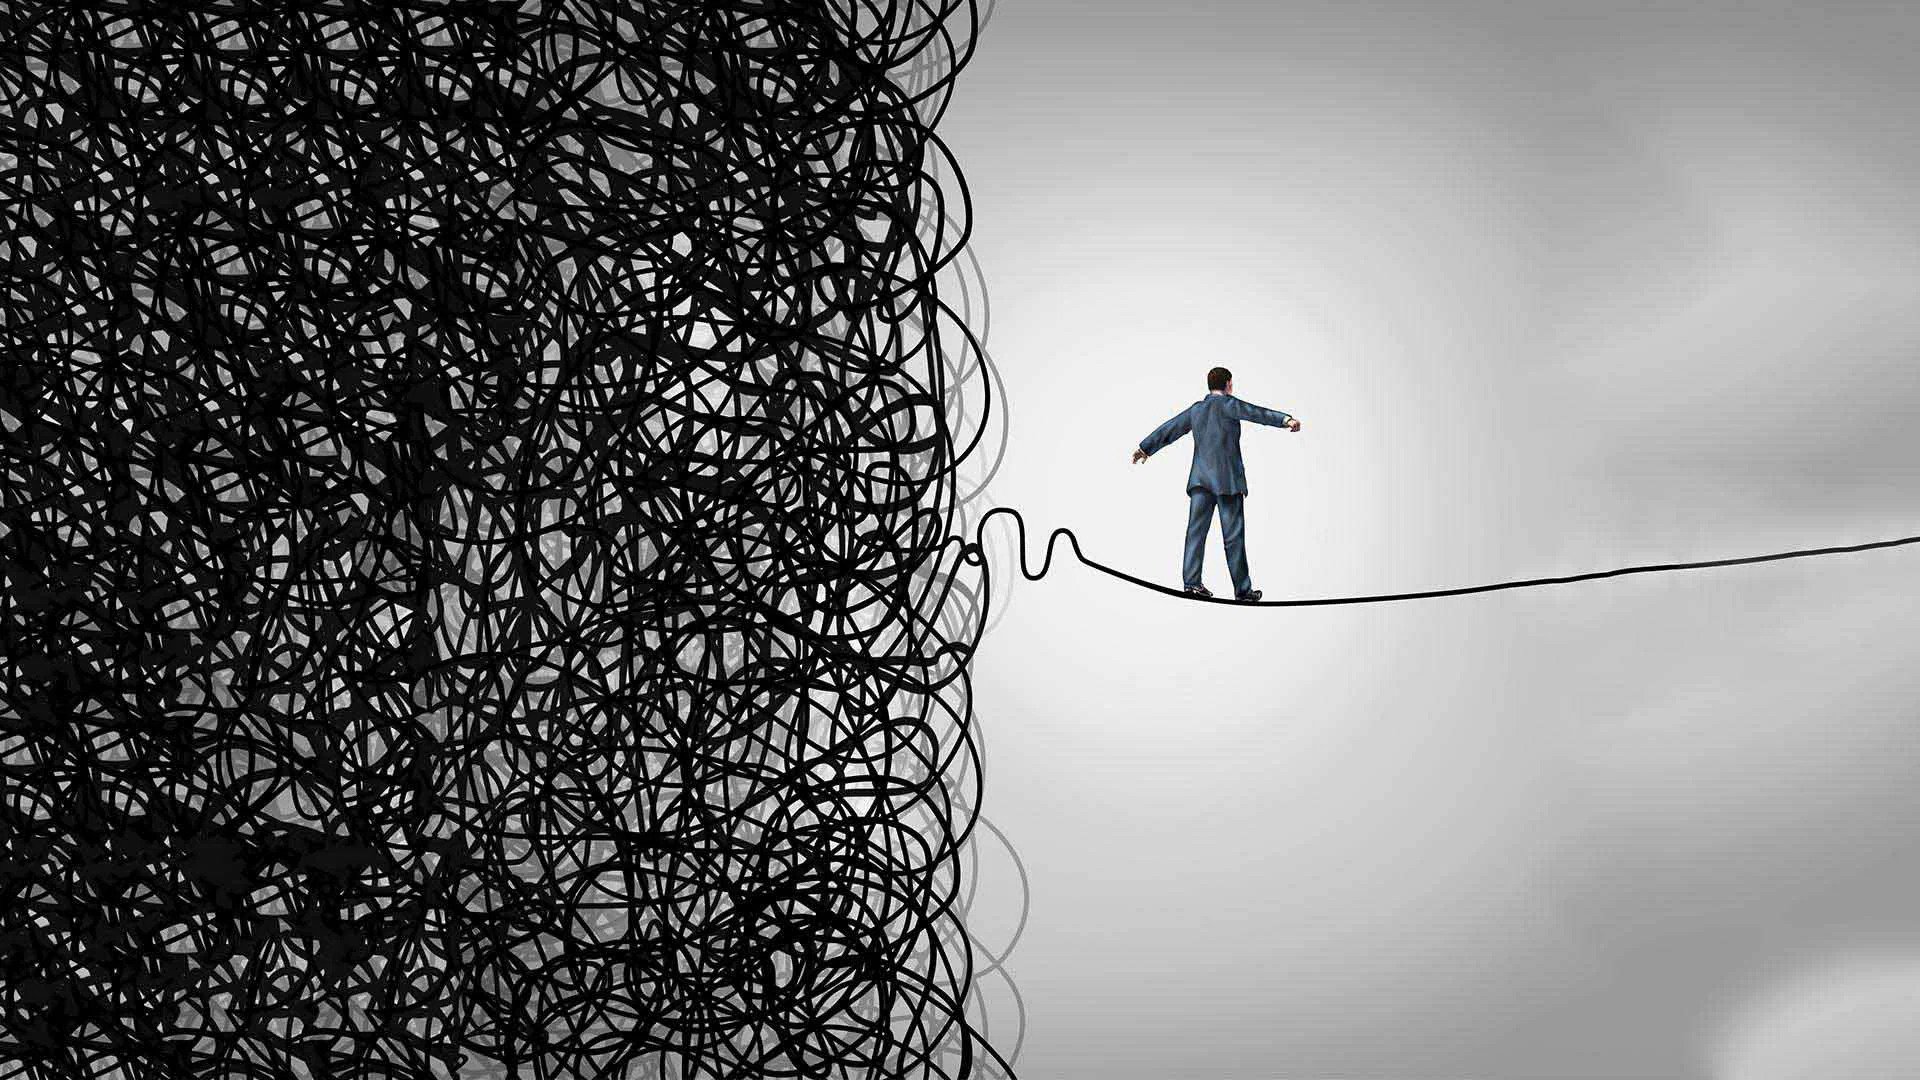 Illustrated photo shows one half of the page covered in black swirling chaotic lines, with one single line breaching the other side of the page. Atop the line, as if it was a rope, balances the figure of a person, making their way from the chaotic side to the other side on the rope, perhaps a metaphor for the individual's holistic health journey